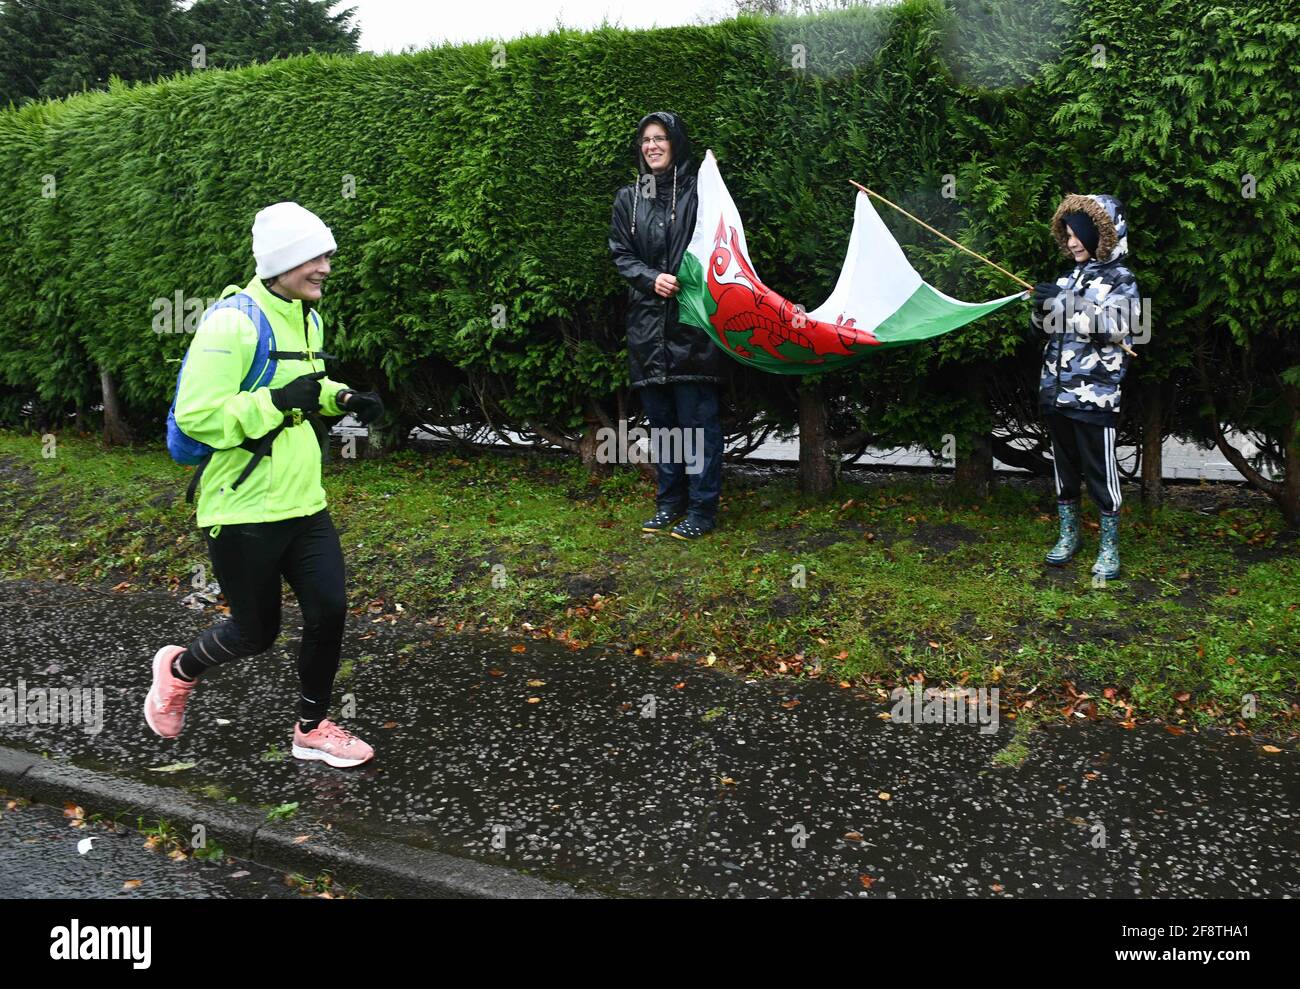 Swansea, Wales, 4th October 2020. UK Weather : Supporters with a Welsh flag brave the heavy rain in Swansea, south Wales to come out and cheer on a runner taking part in the Virtual London Marathon.   Photo credit : Robert Melen. Stock Photo